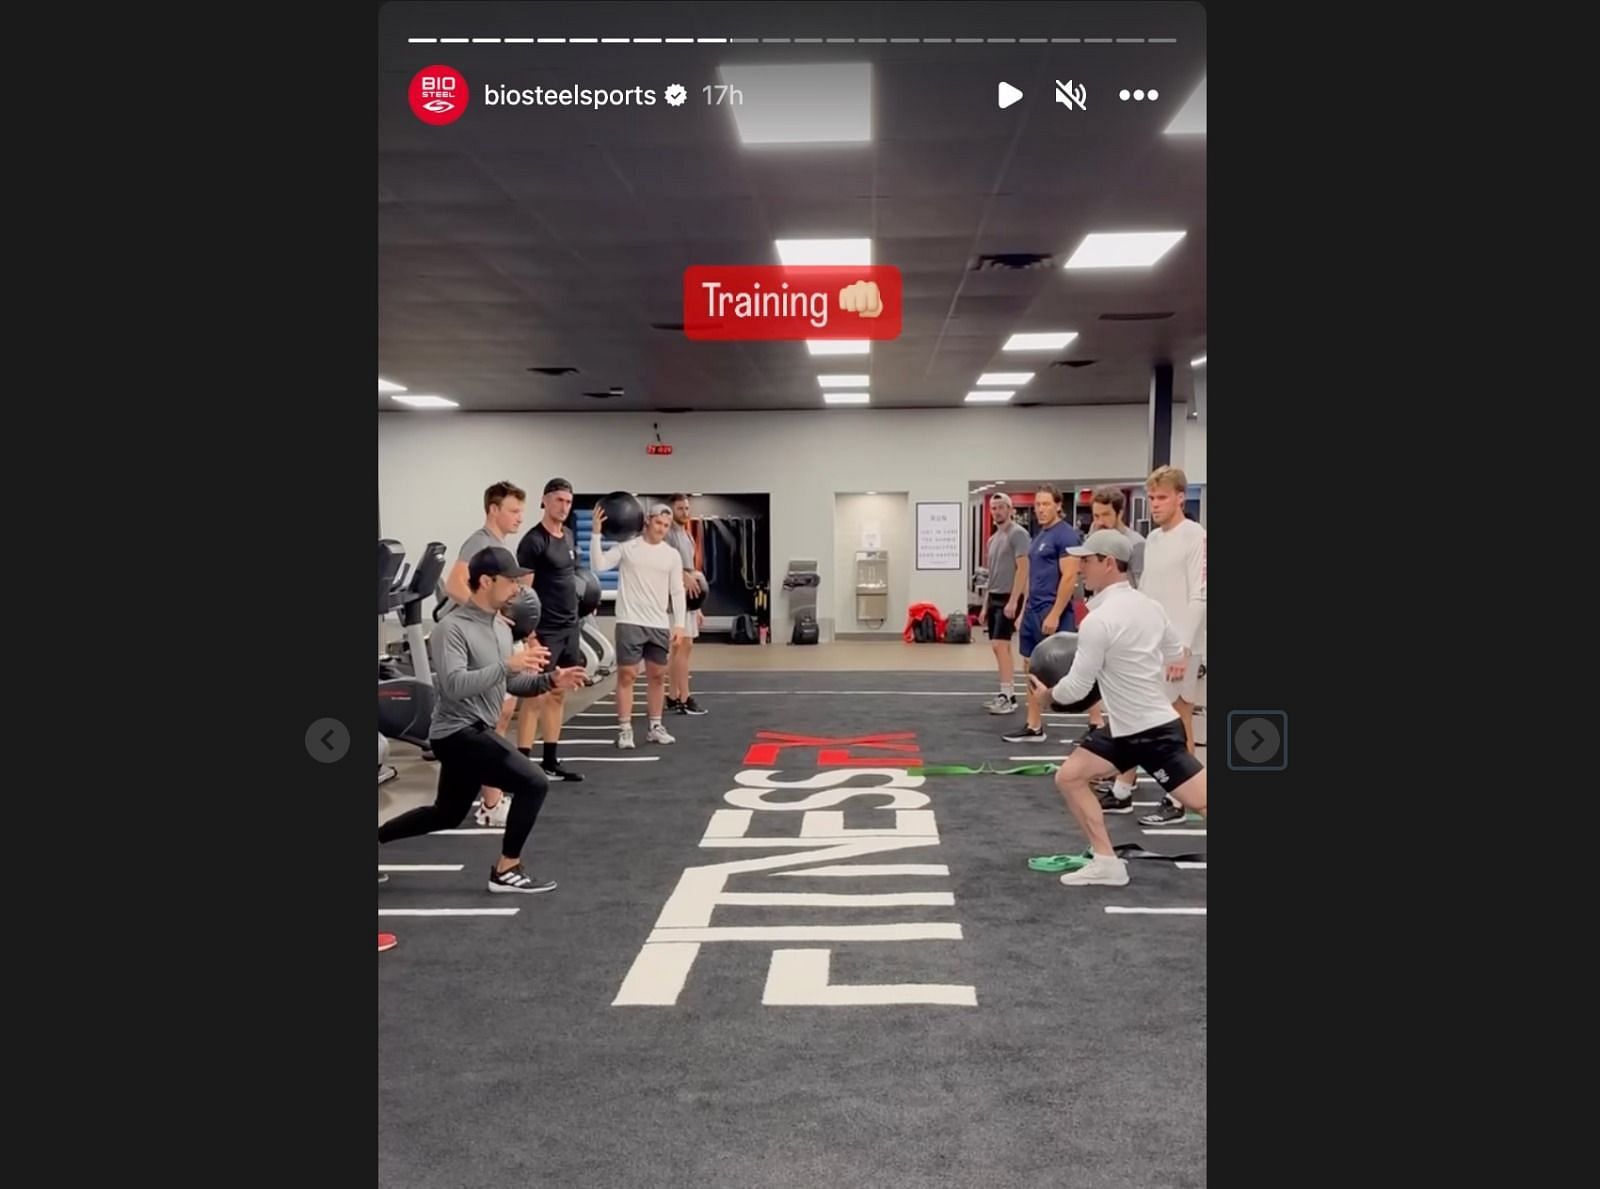 Multiple NHL superstars including the likes of Connor McDavid and Connor Bedard were spotted at ﻿the BioSteel training camp